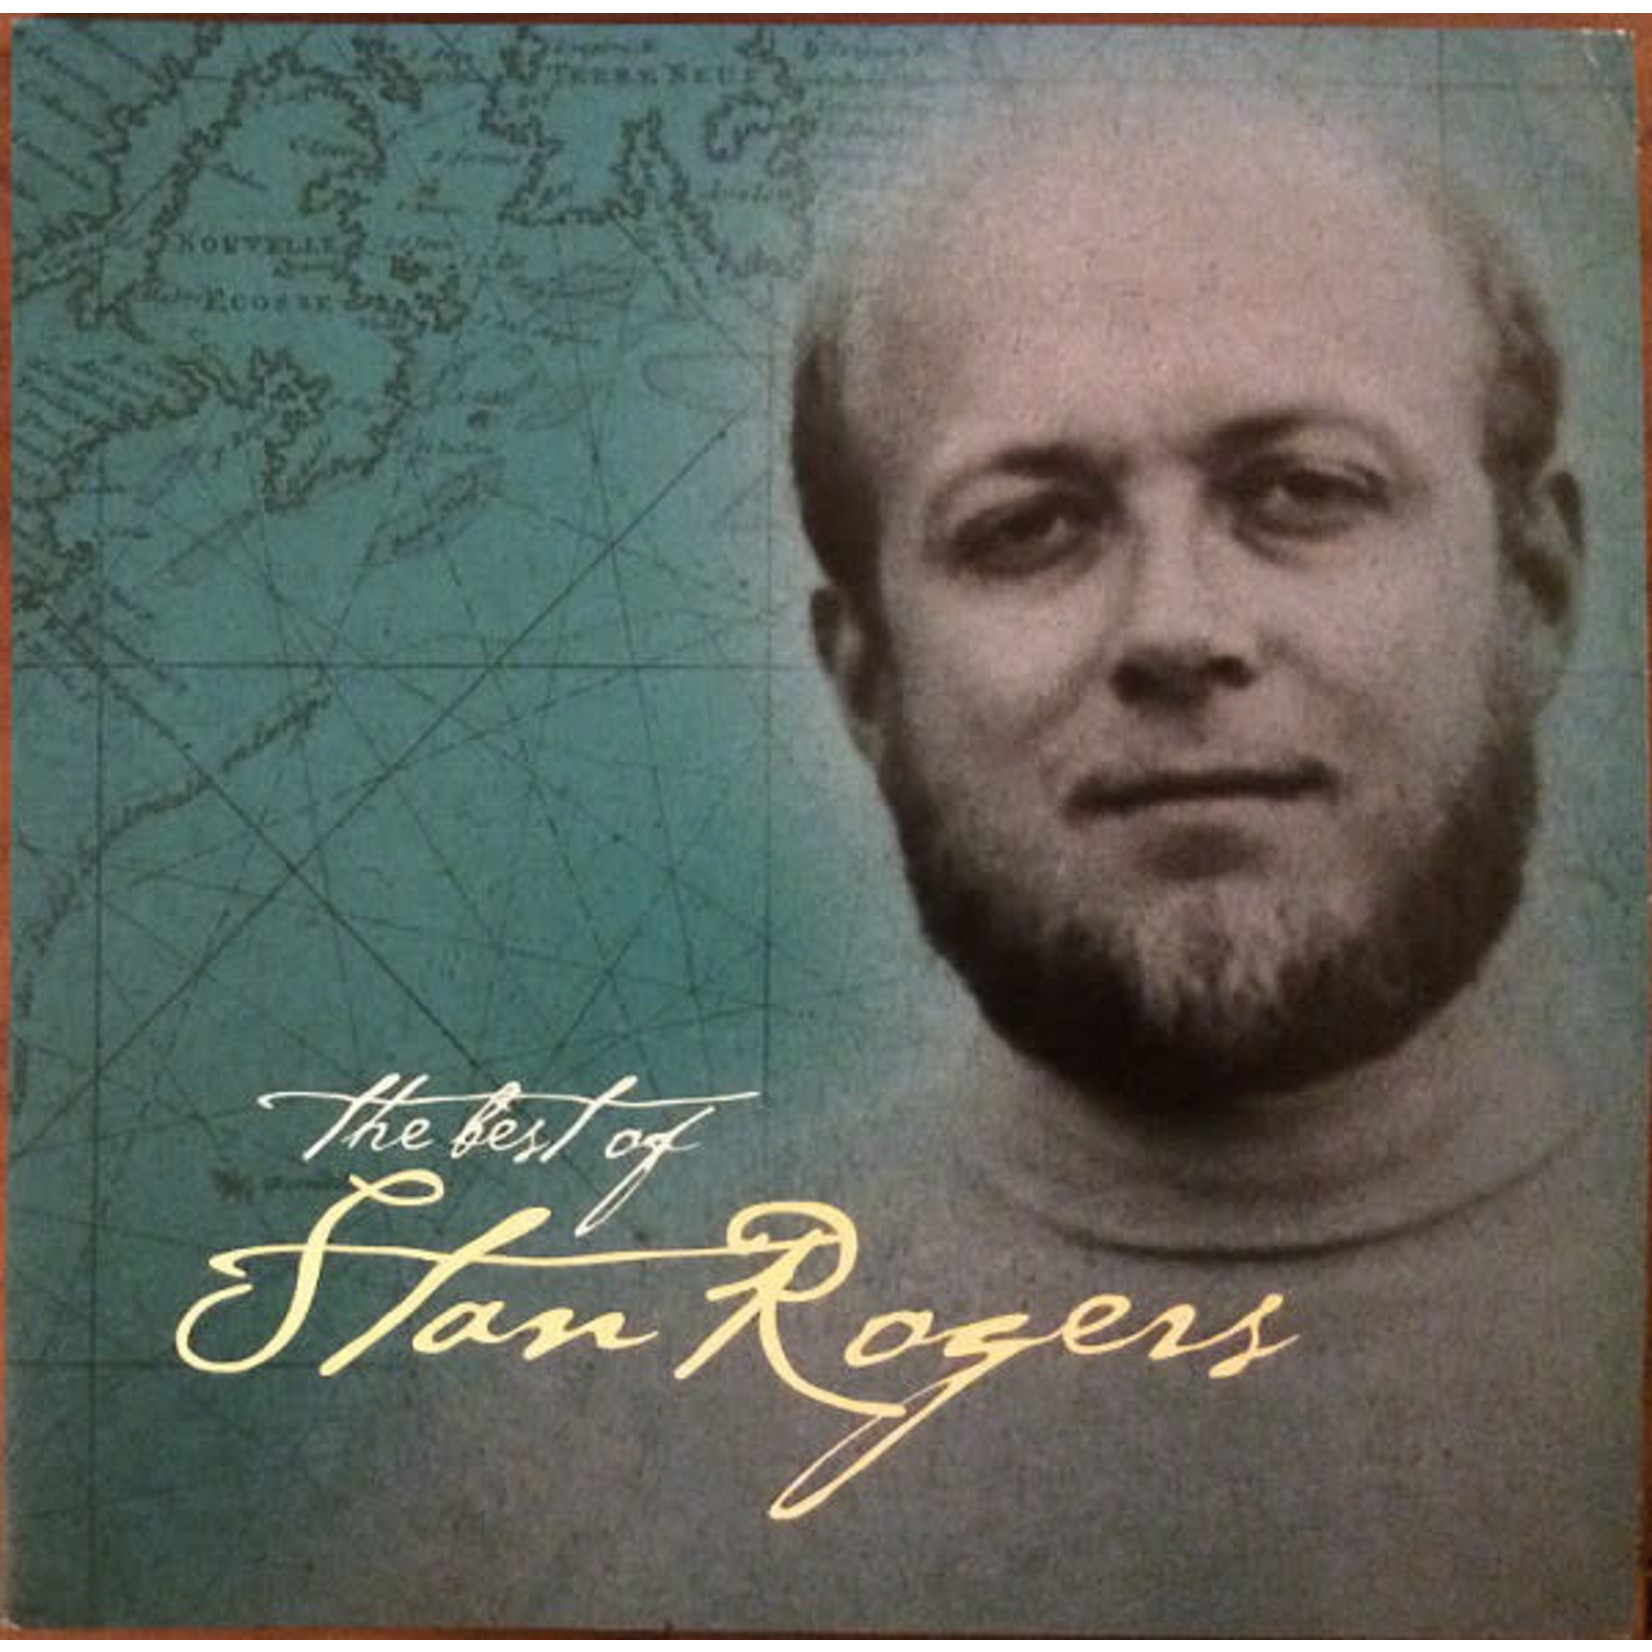 [New] Stan Rogers - The Best Of (2LP)